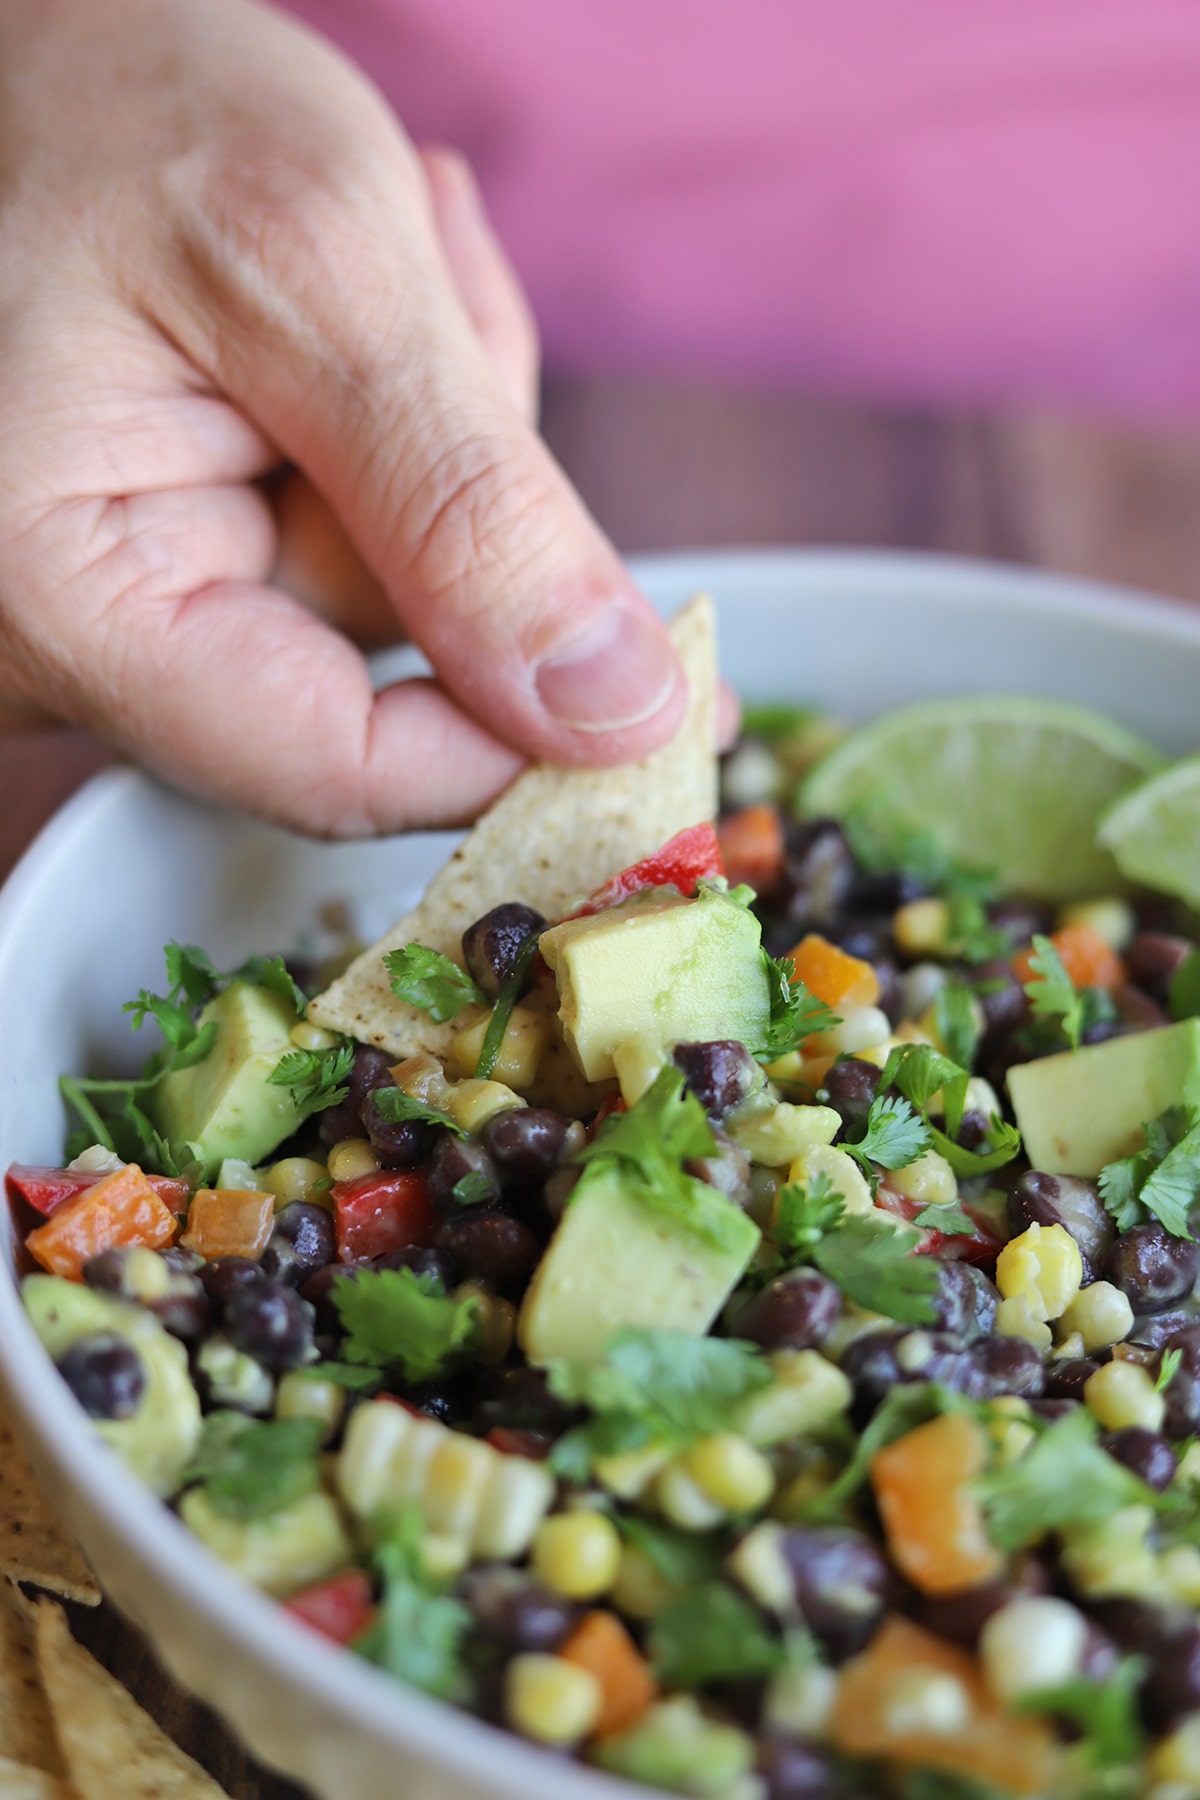 Hand dipping chip into black bean salad with avocado and corn.